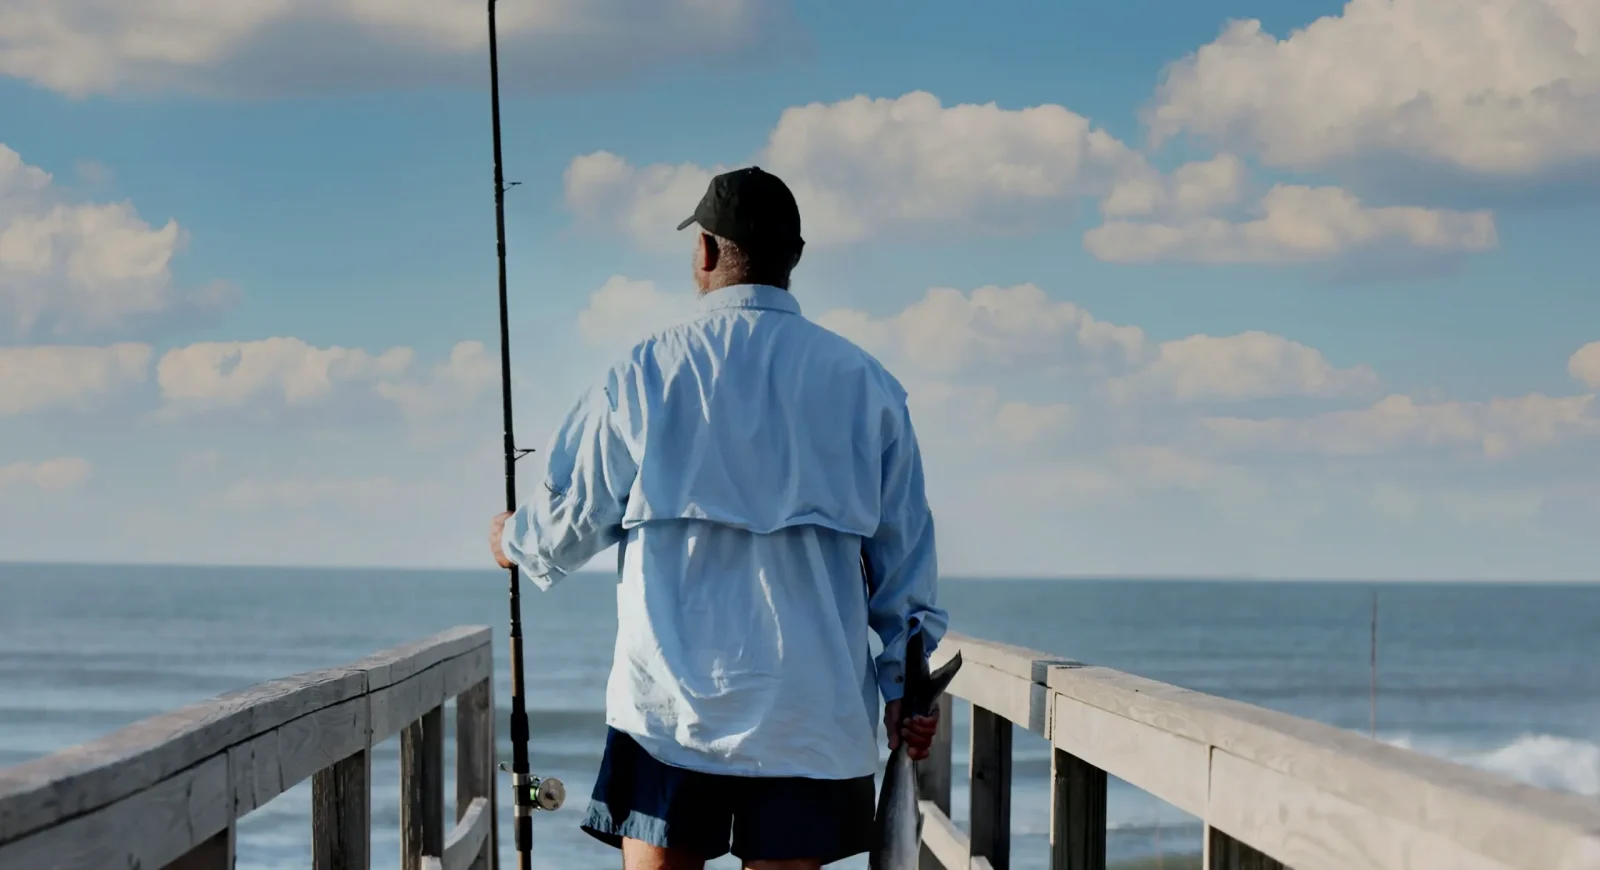 A man with fishing gear looks out on the ocean on a beach in North Carolina